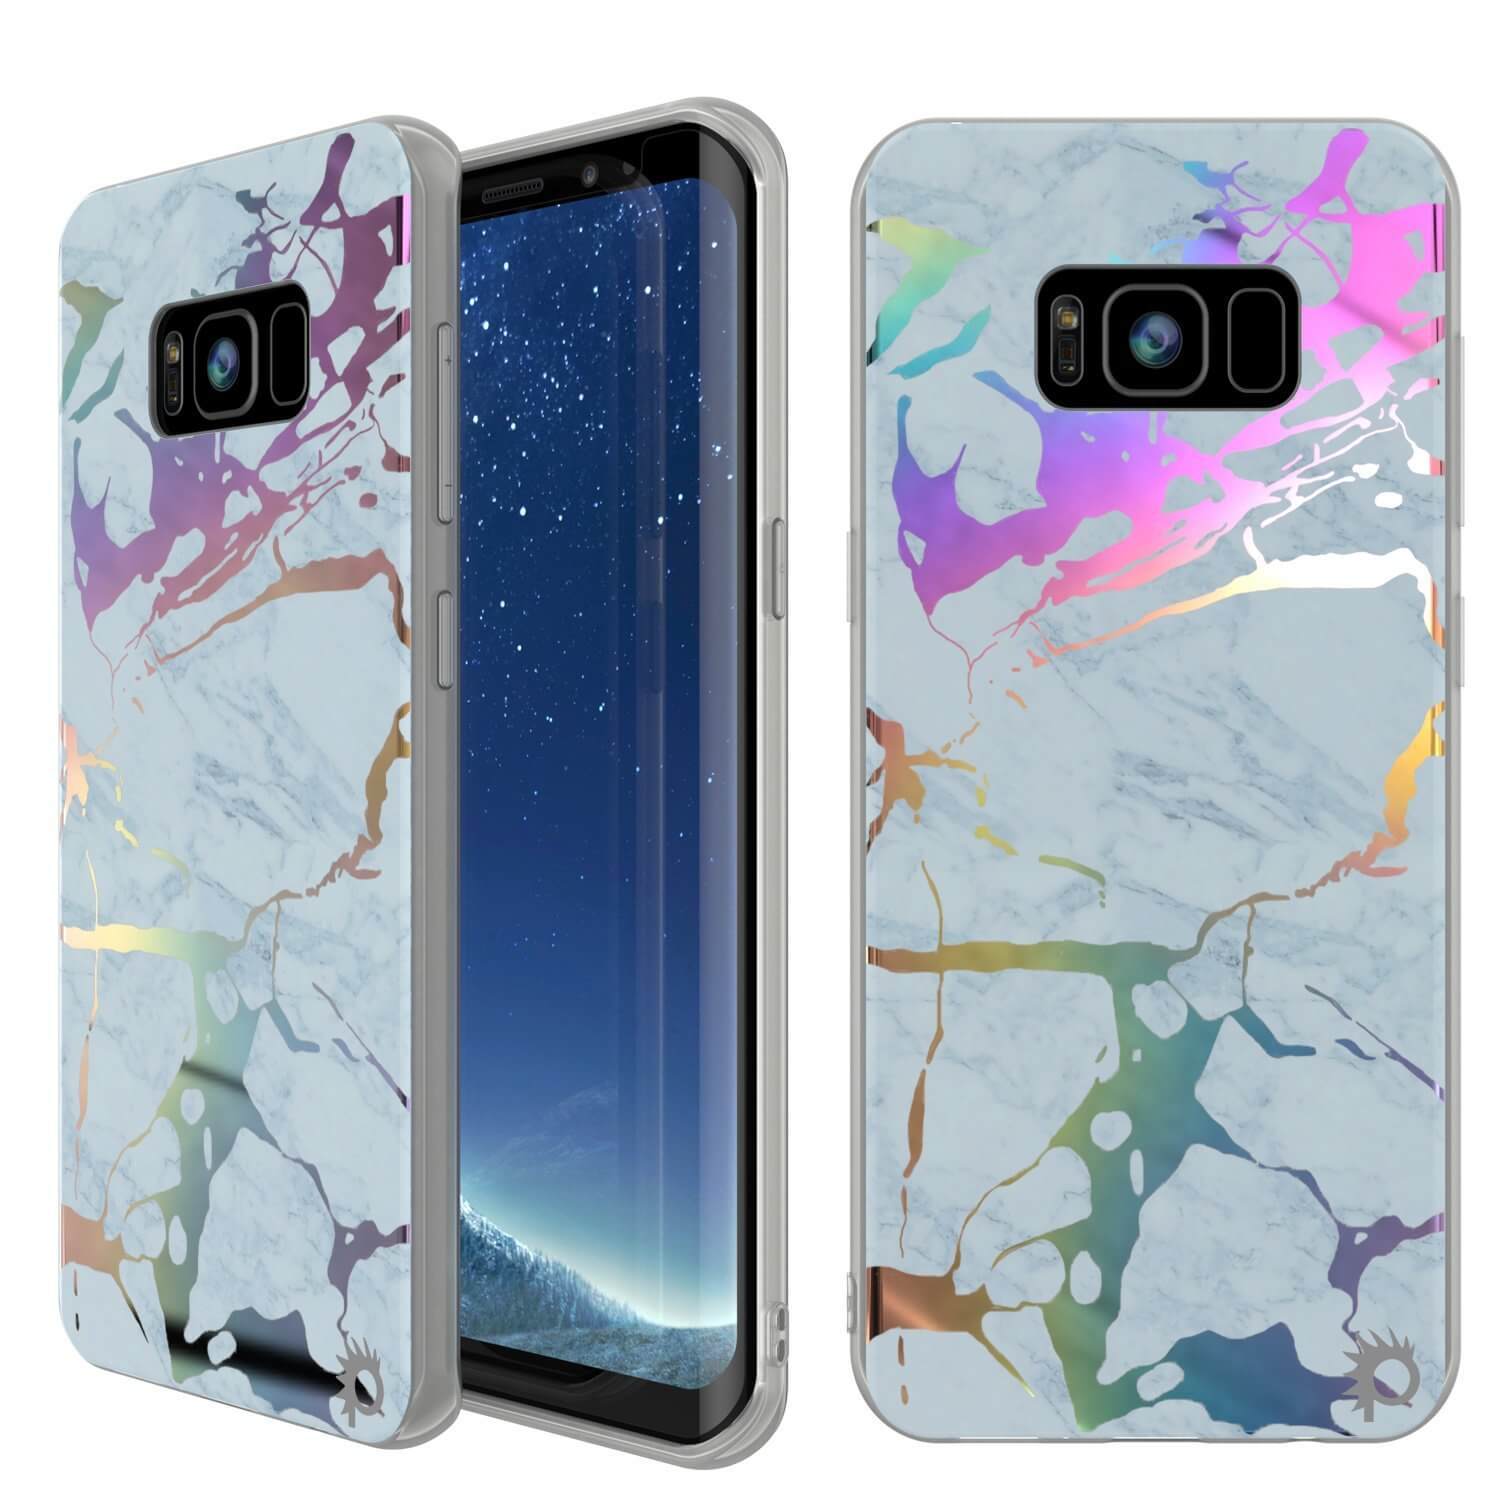 Punkcase Galaxy S8+ PLUS Marble Case, Protective Full Body Cover W/PunkShield Screen Protector (Blue Marmo) - PunkCase NZ